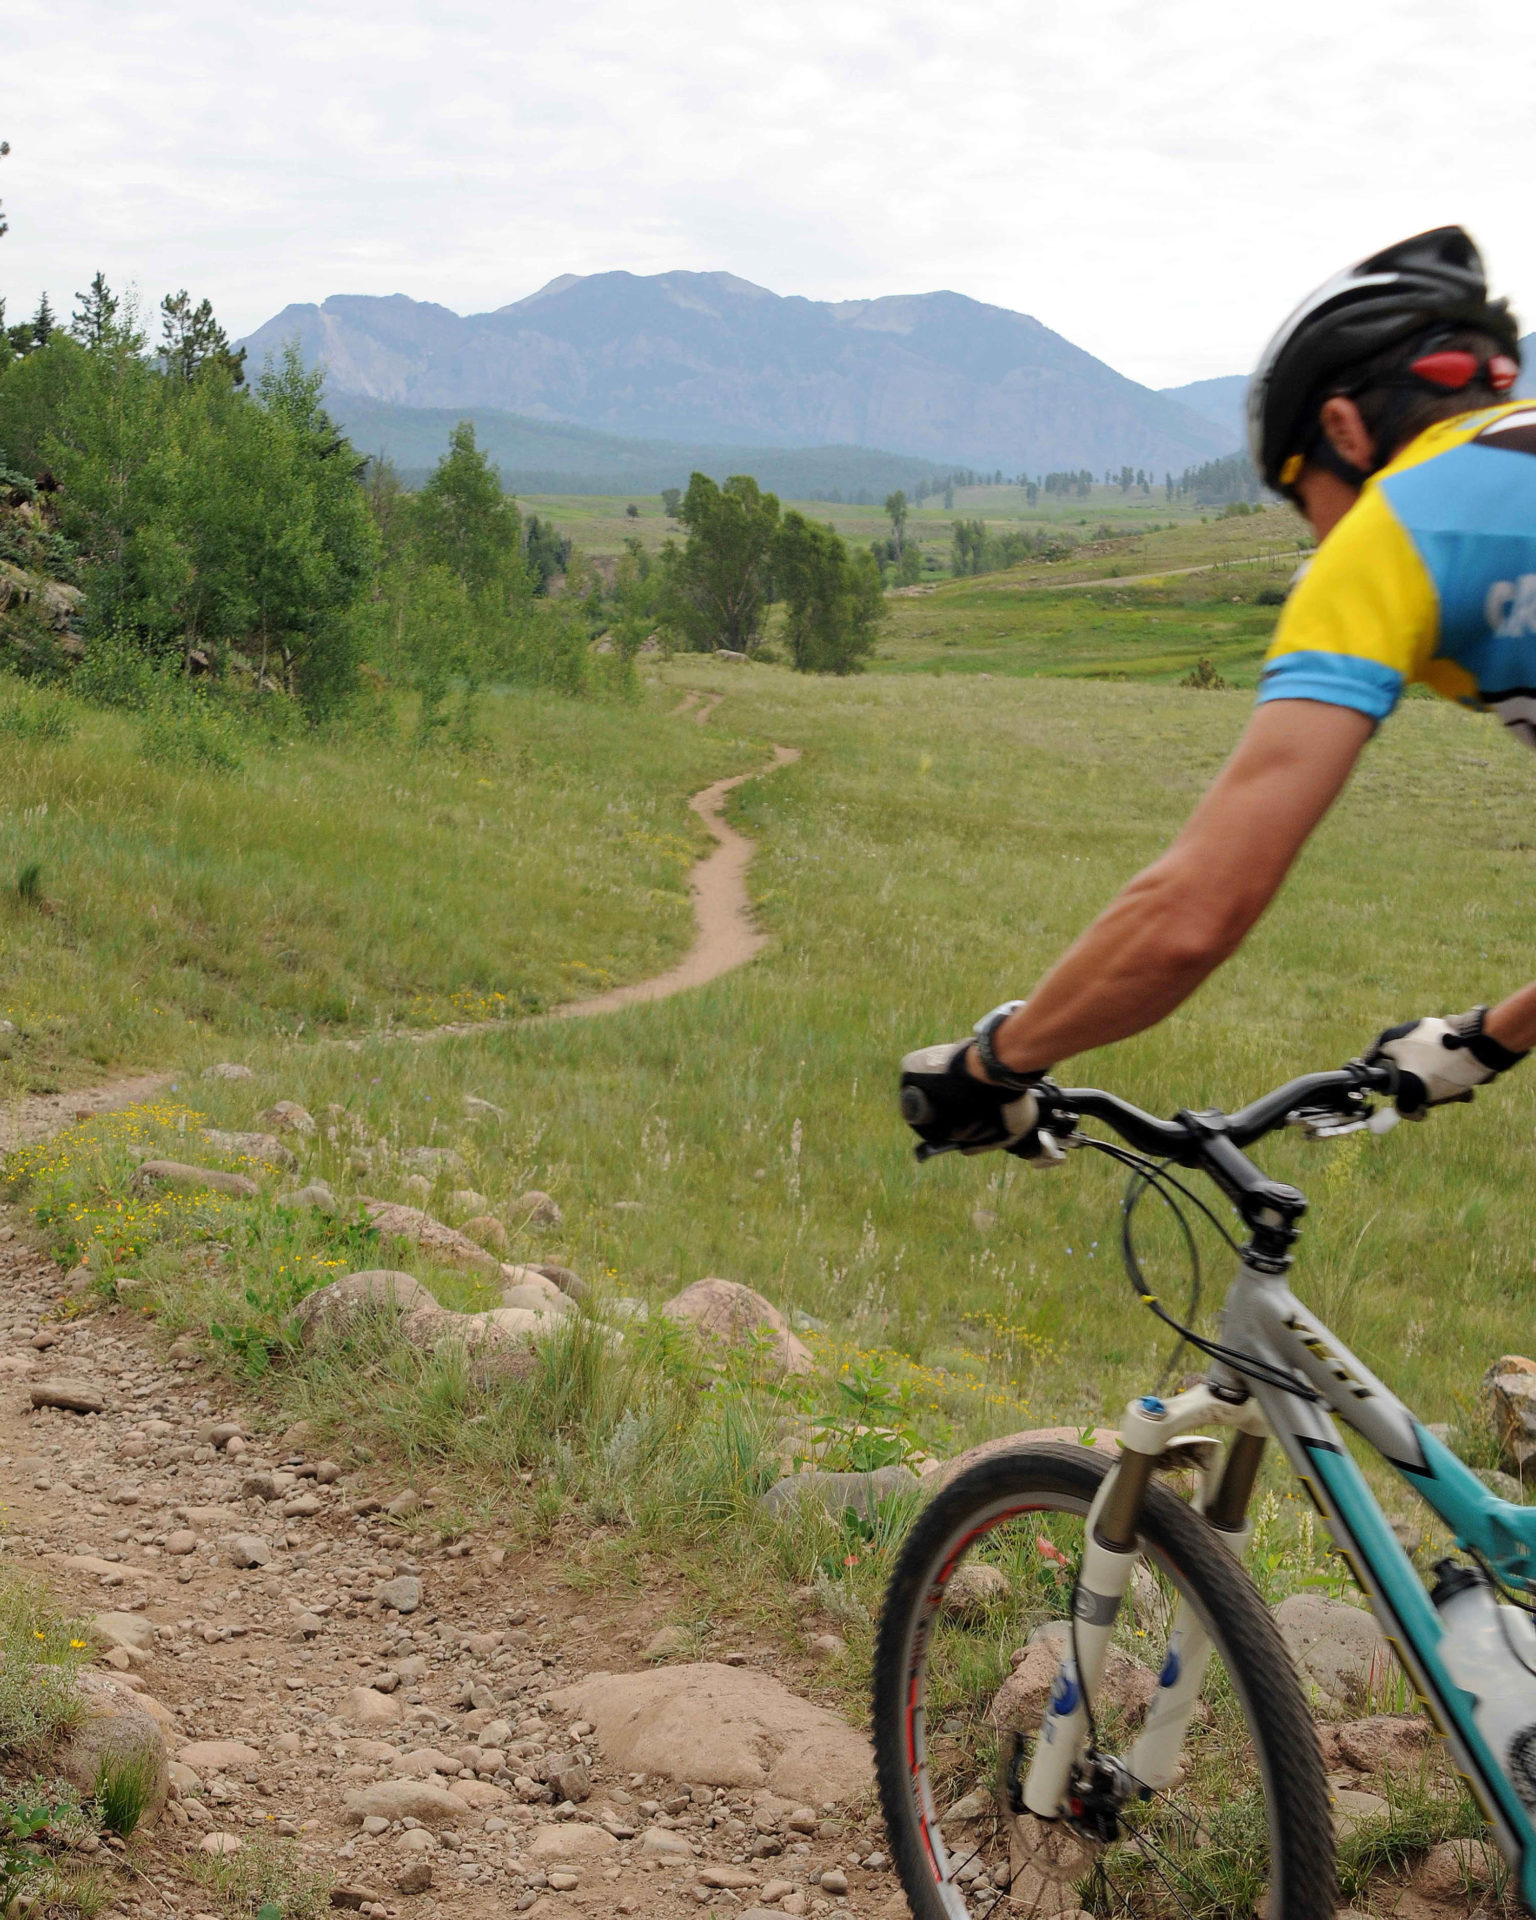 A person rides their bike on a mountain trail, with a mountain in the background.